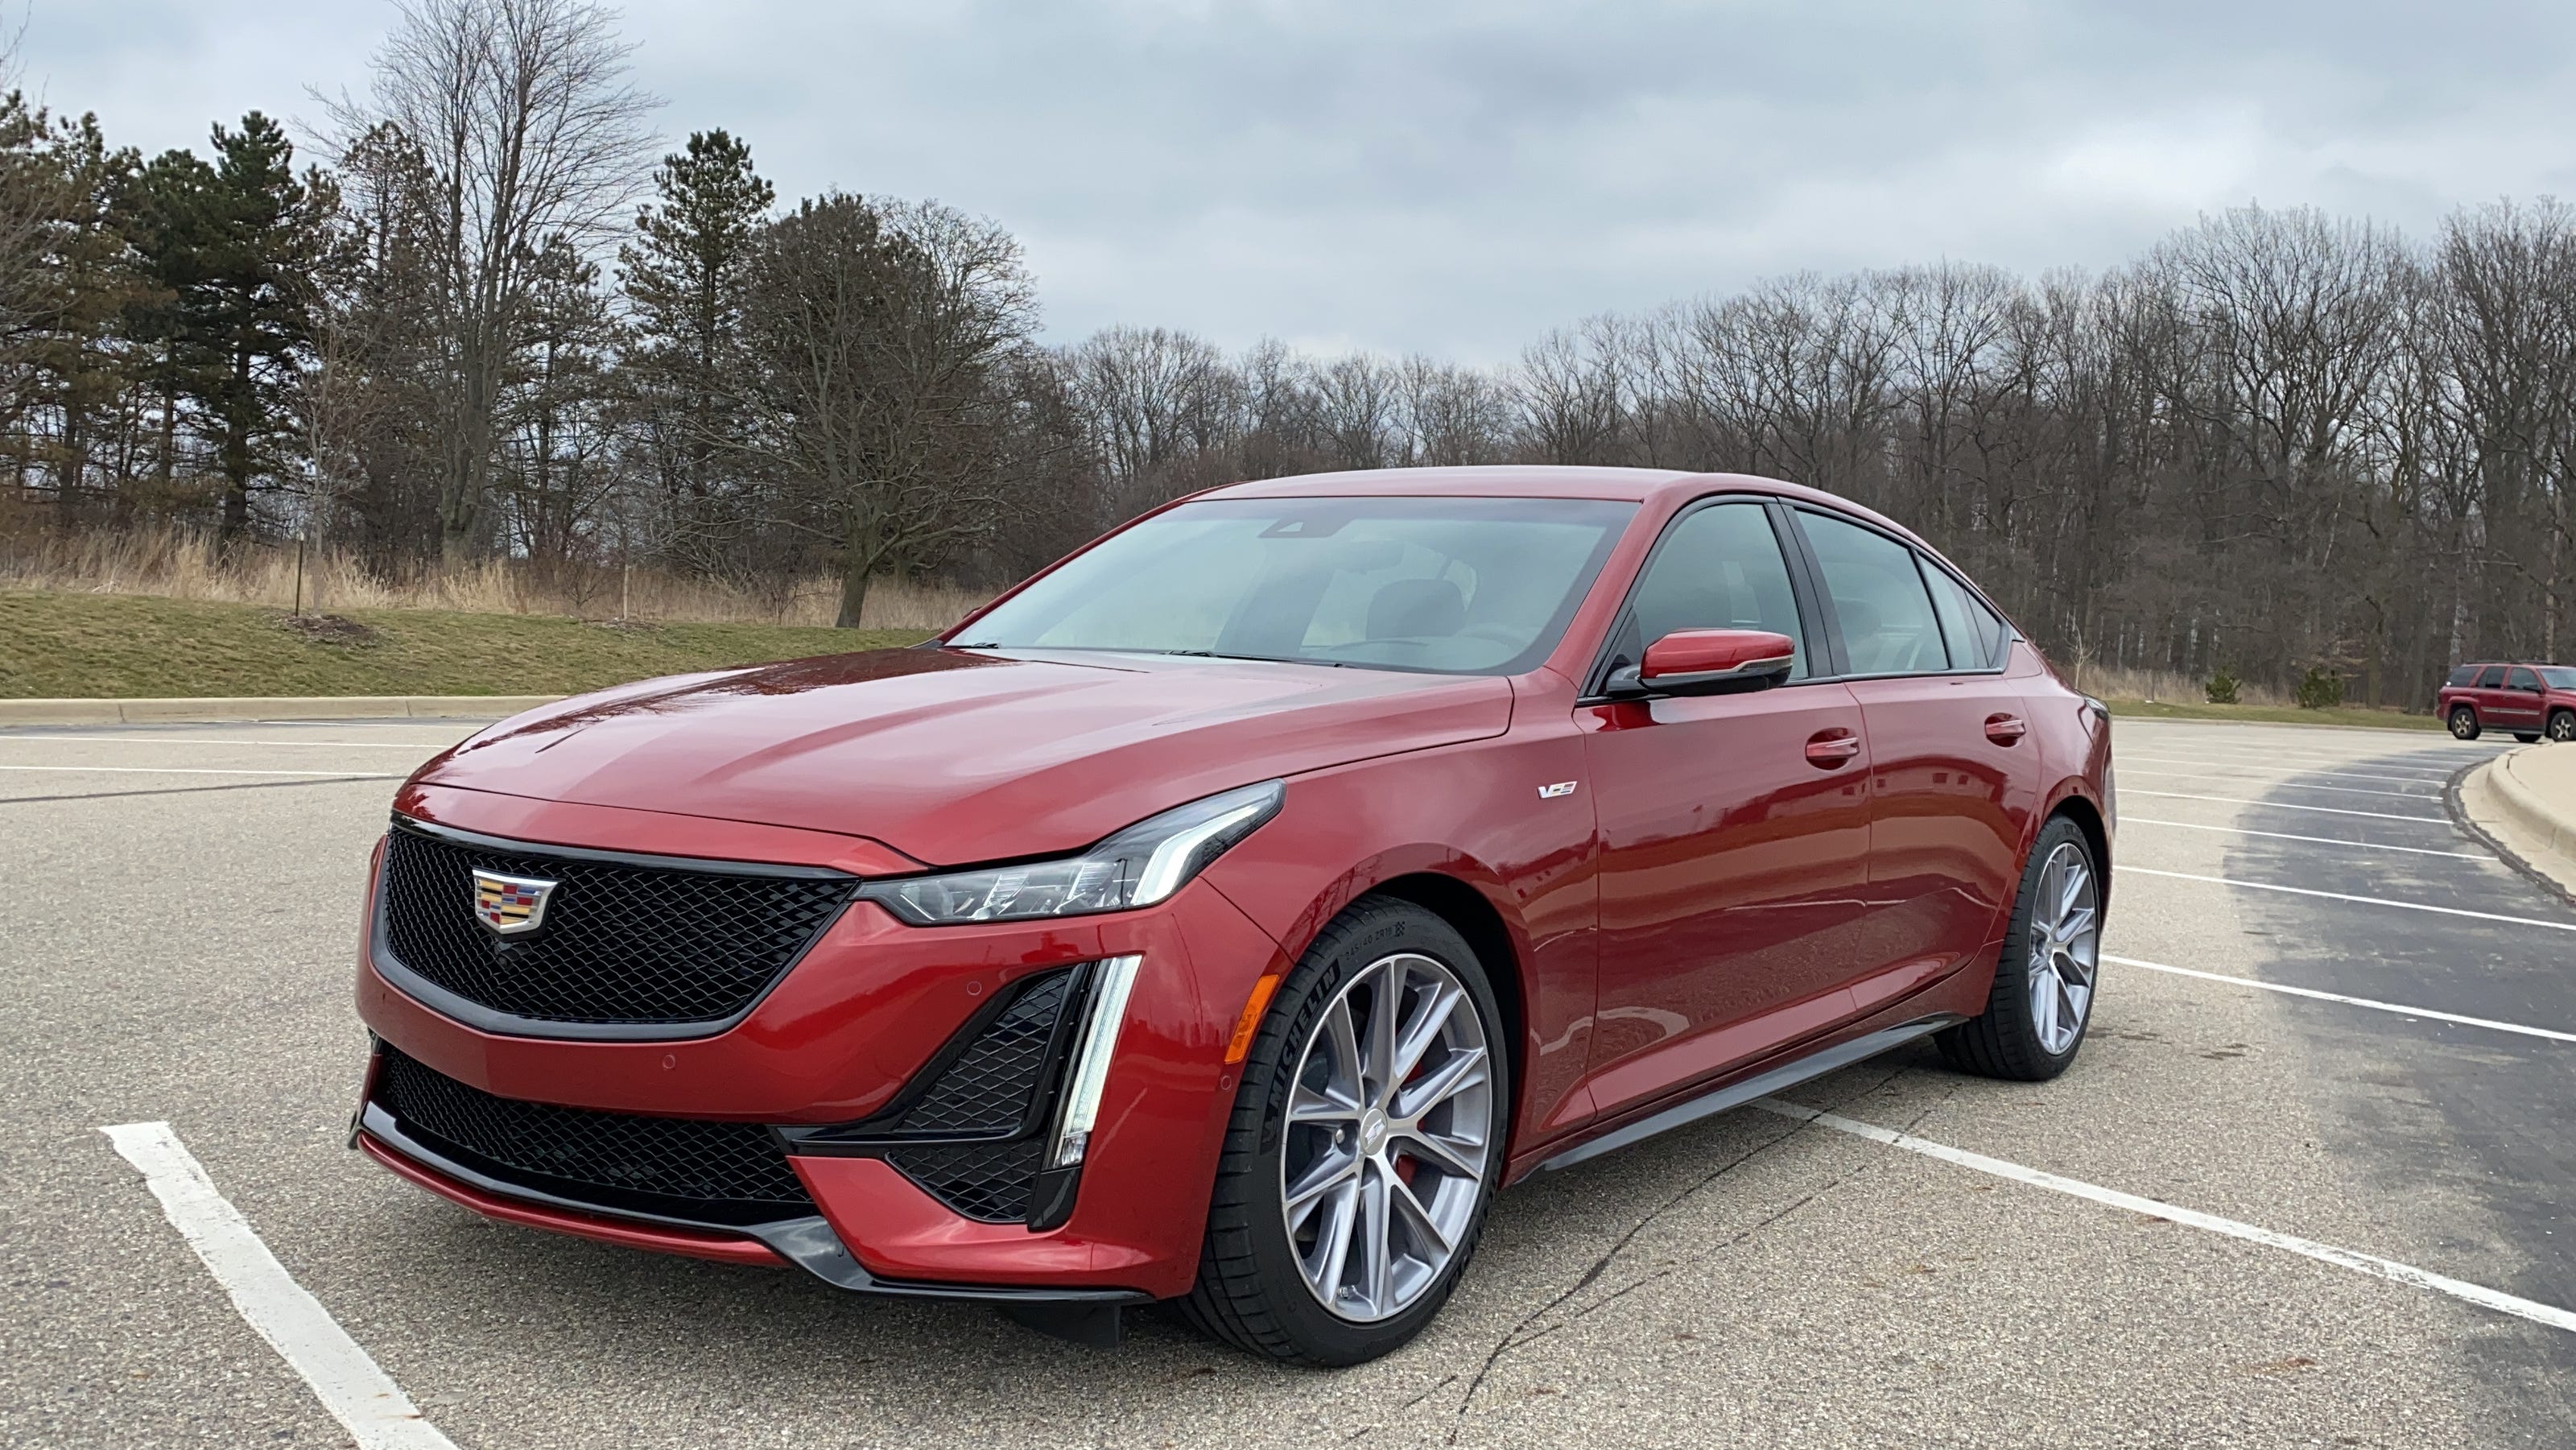 Cadillac CT5V arrives as one of 2020’s most pleasant surprises